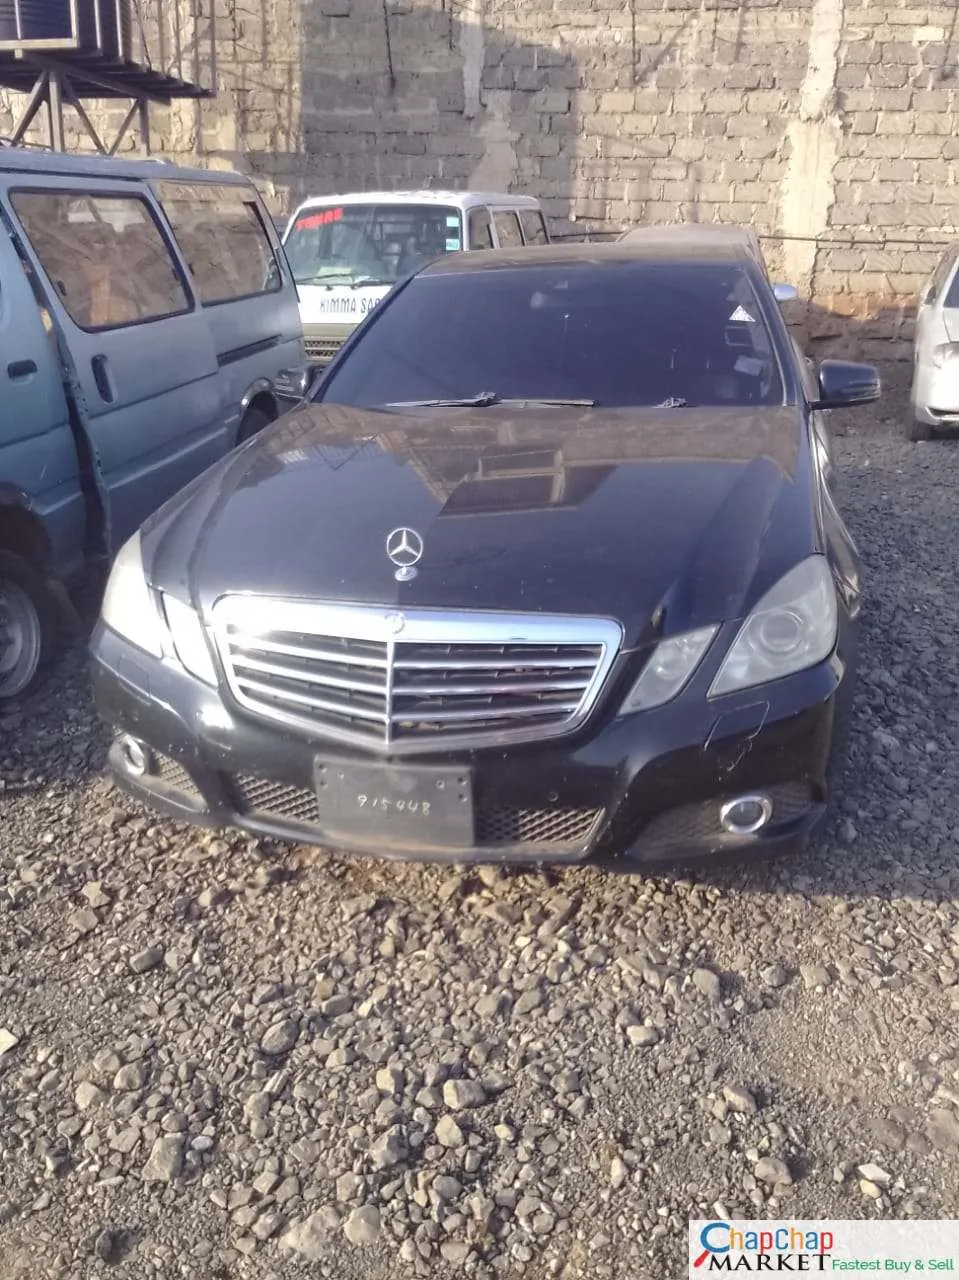 Cars Cars For Sale/Vehicles-Mercedes Benz E350 for Sale in kenya CHEAPEST 2M You Pay 30% DEPOSIT Trade in OK EXCLUSIVE e class 3